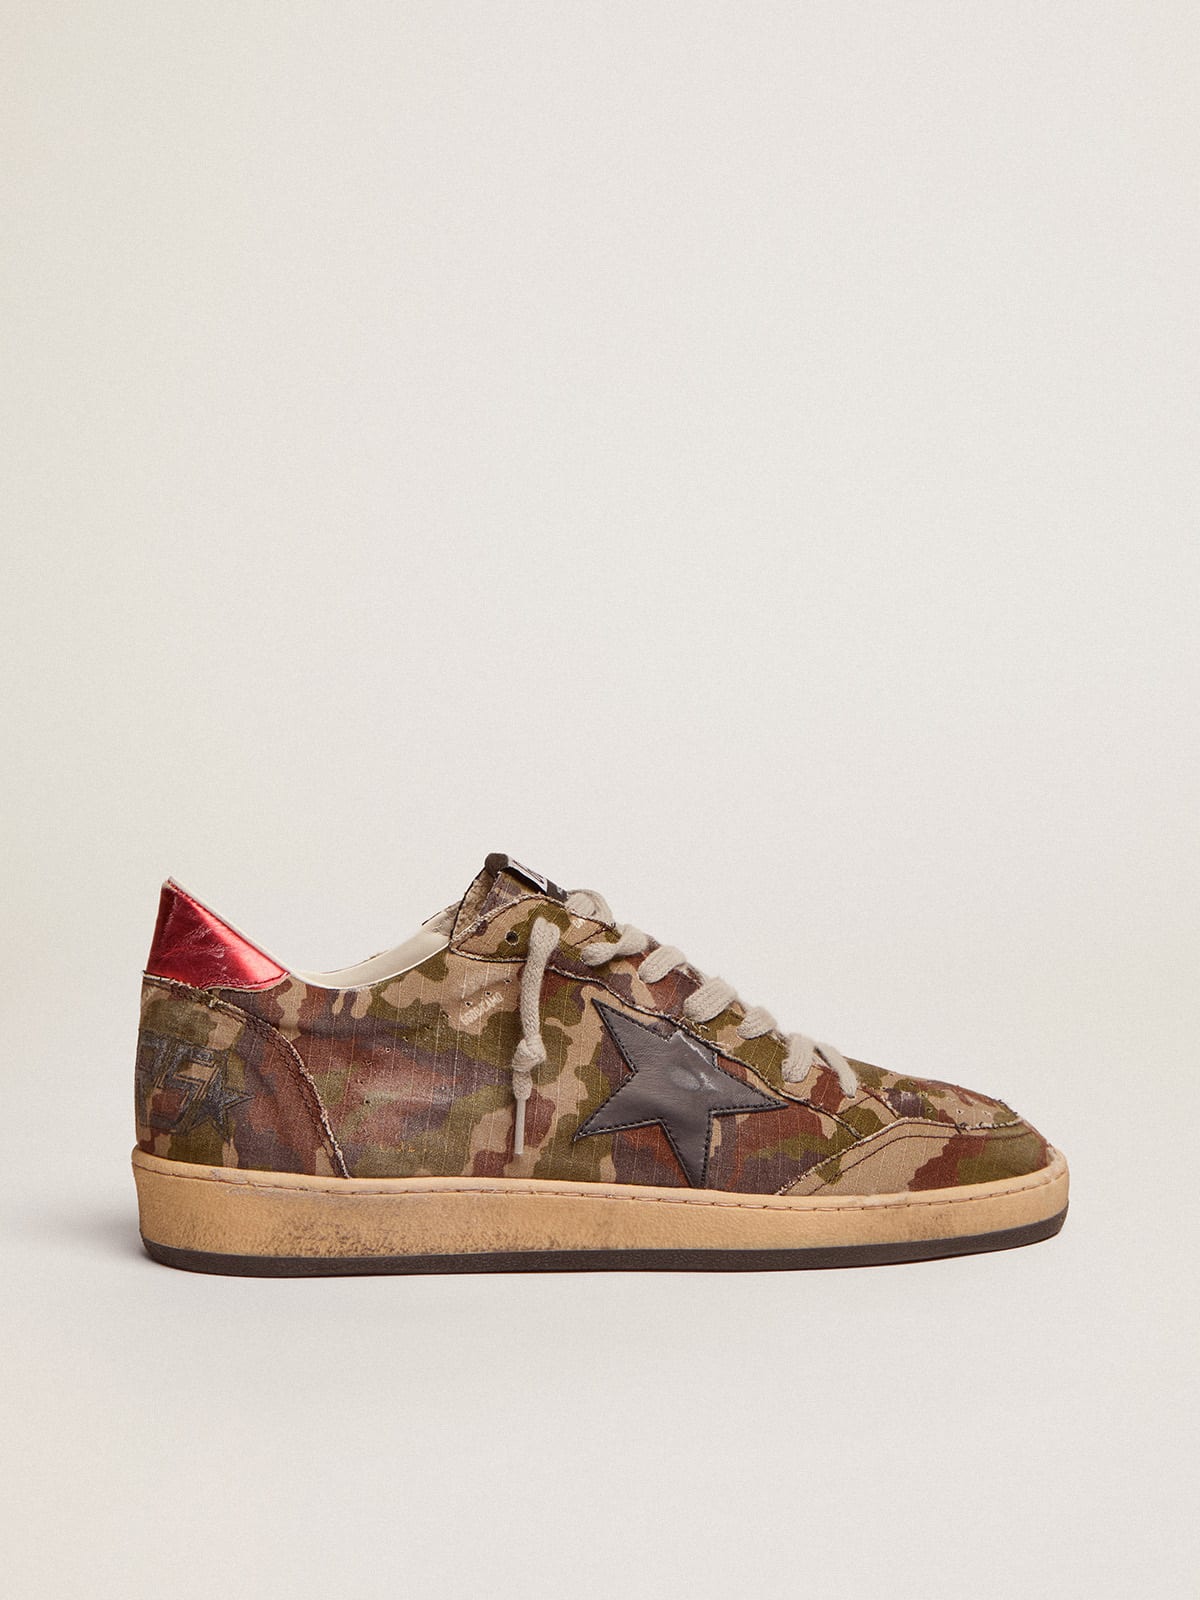 Ball Star sneakers in camouflage ripstop fabric with midnight-blue leather star and red laminated leather heel tab